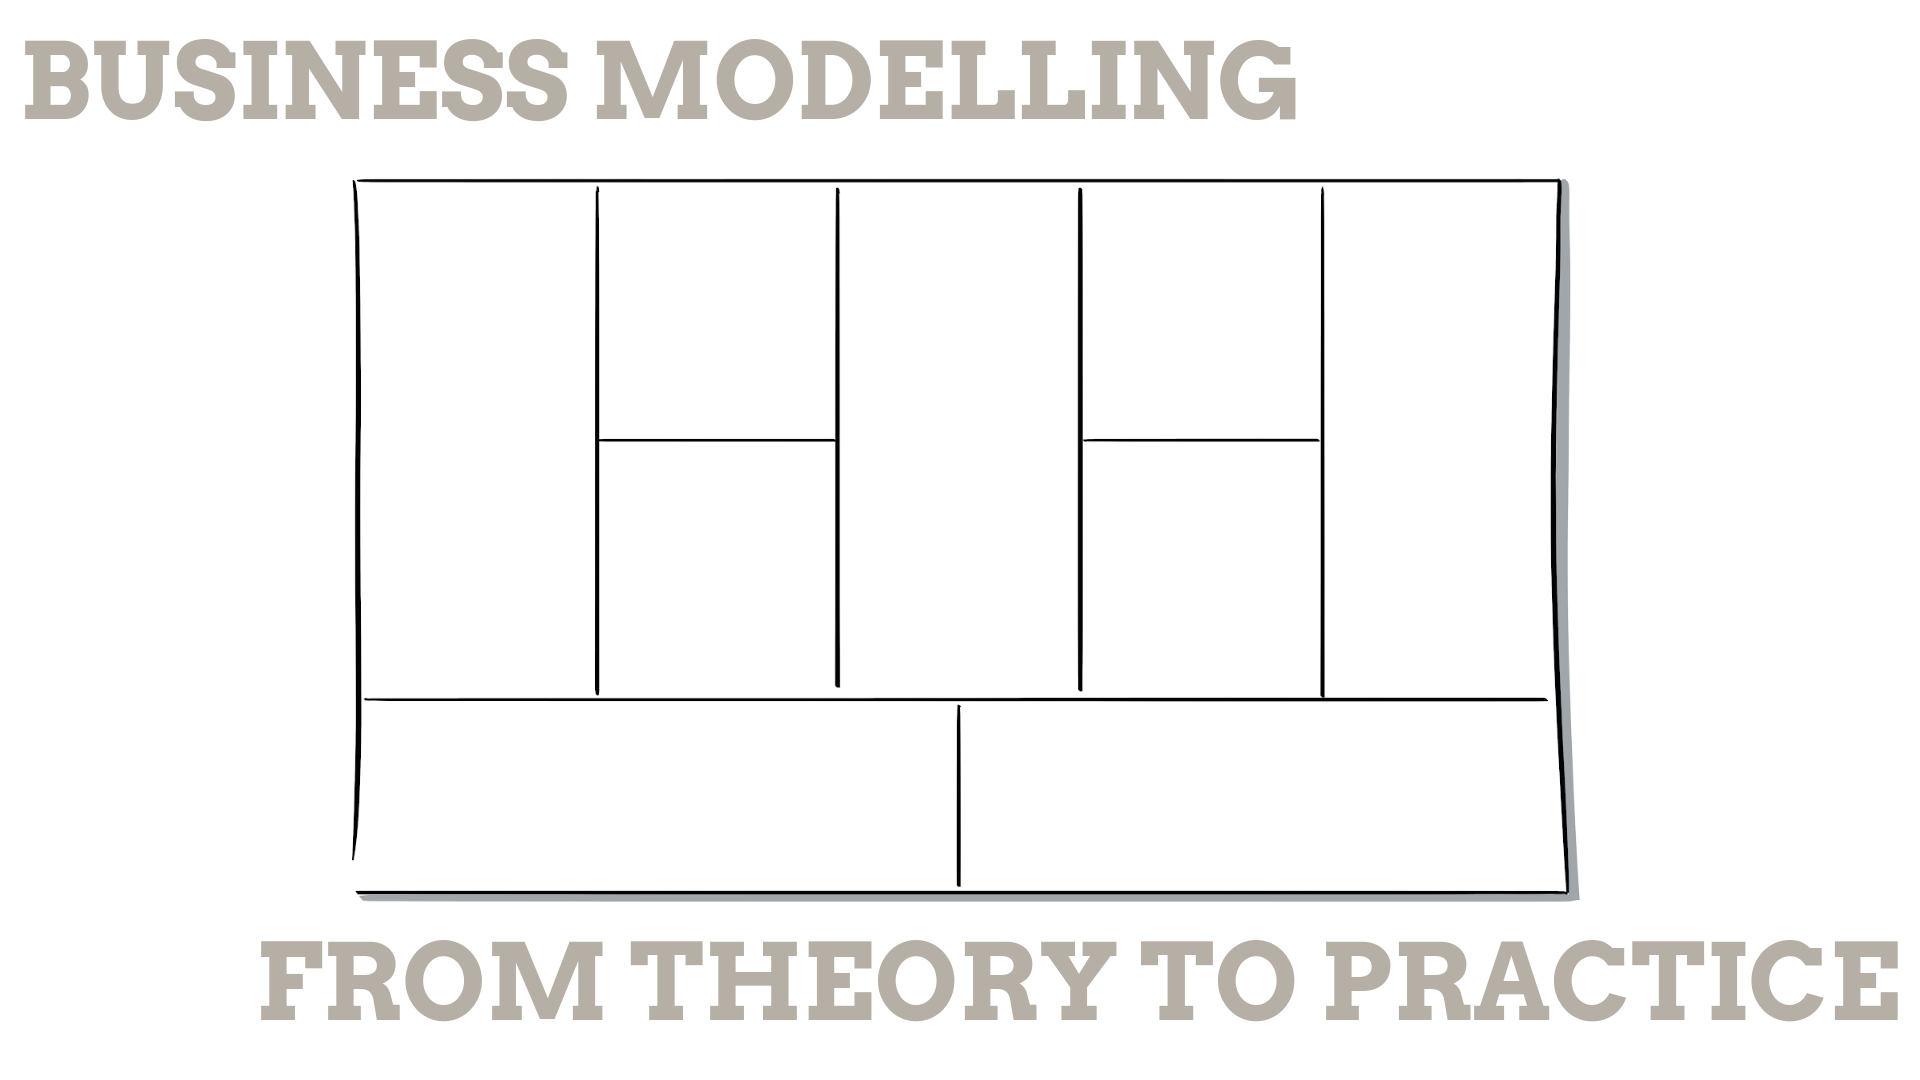 Teaching business modelling without committing murder